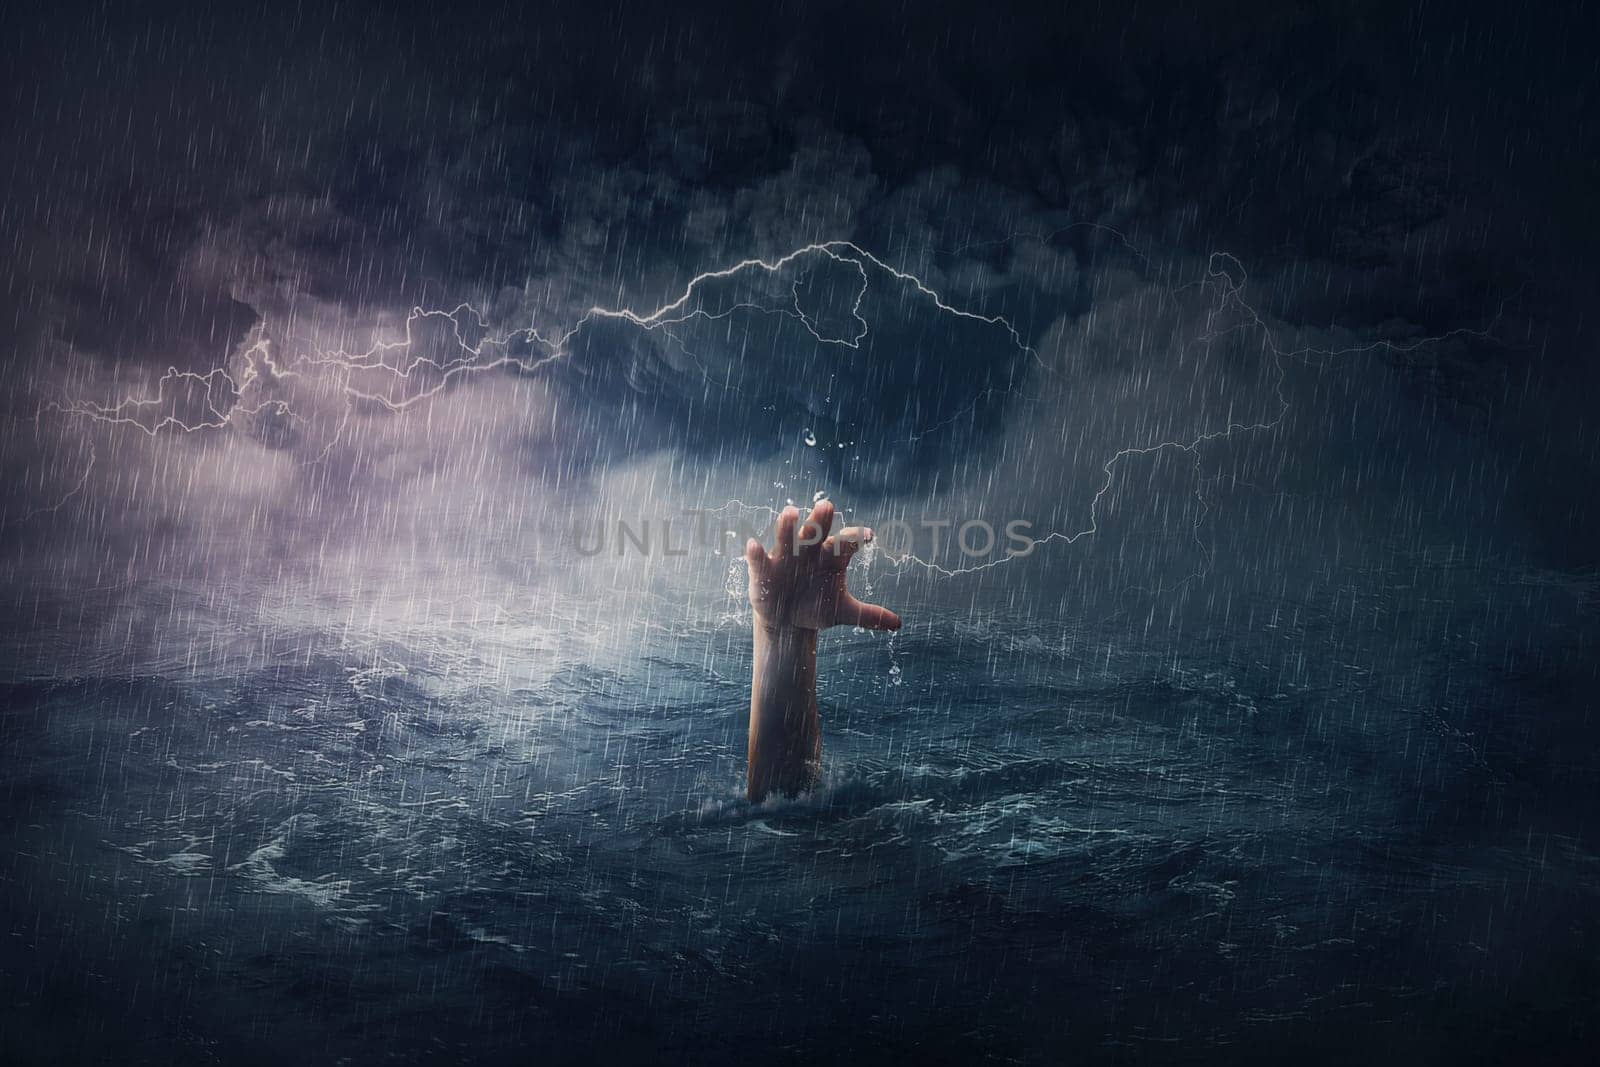 Arm drowning in the sea. Surreal and dramatic scene of person hand sinking in the ocean under a hurricane stormy weather. People need help in risk situations. Despair, depression and failure metaphor by psychoshadow